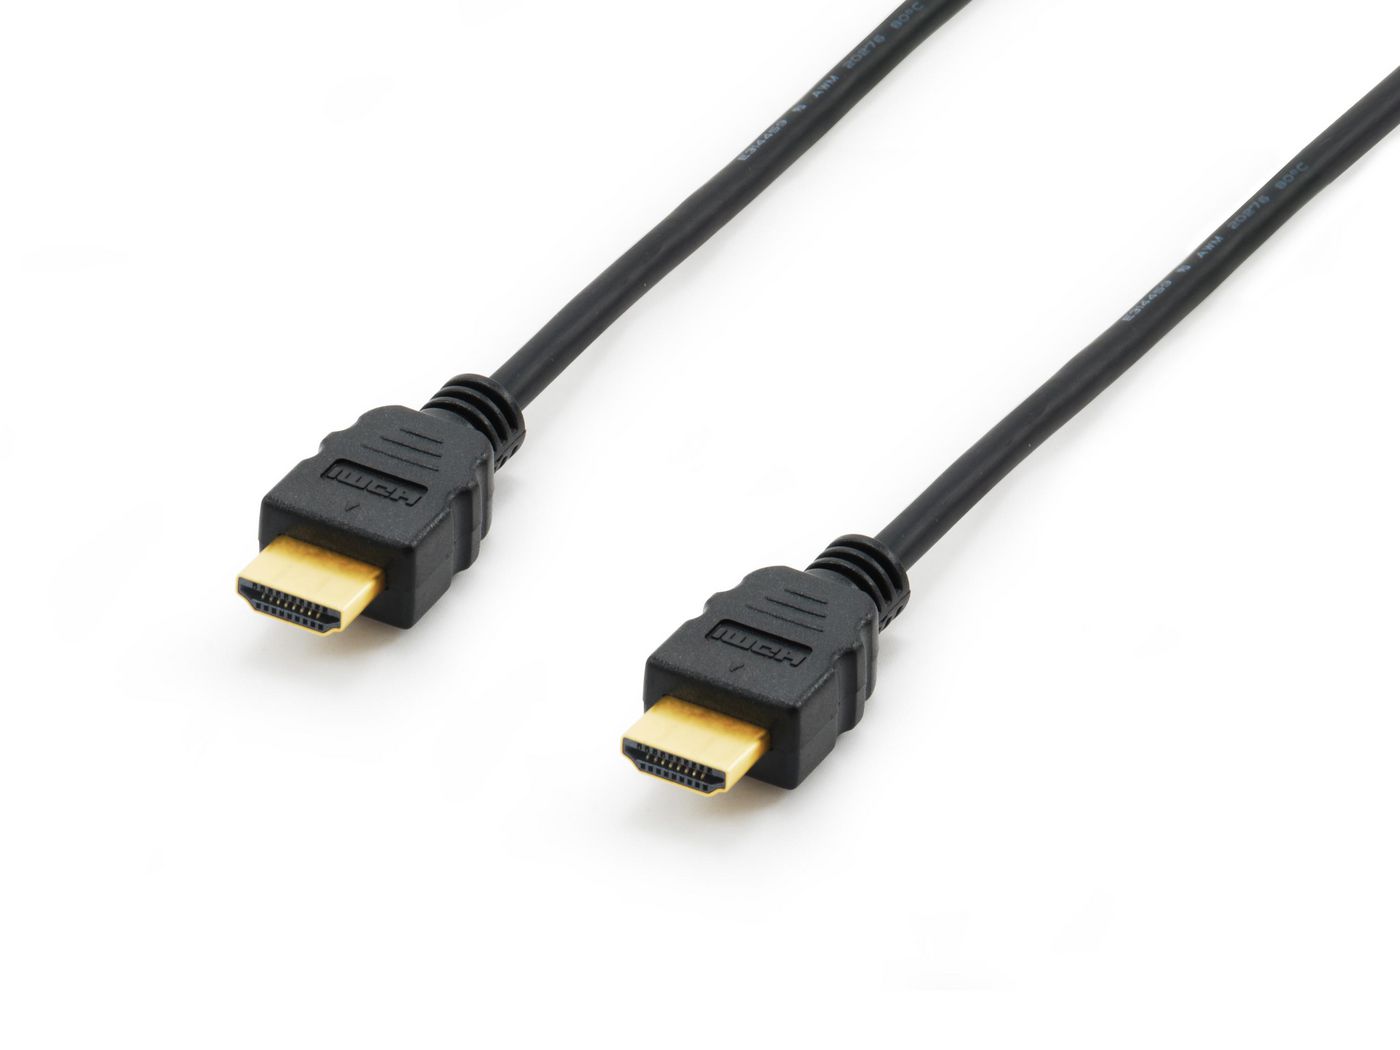 Equip 159352 W128829025 Hdmi 1.4 Cable, 1.8M, 